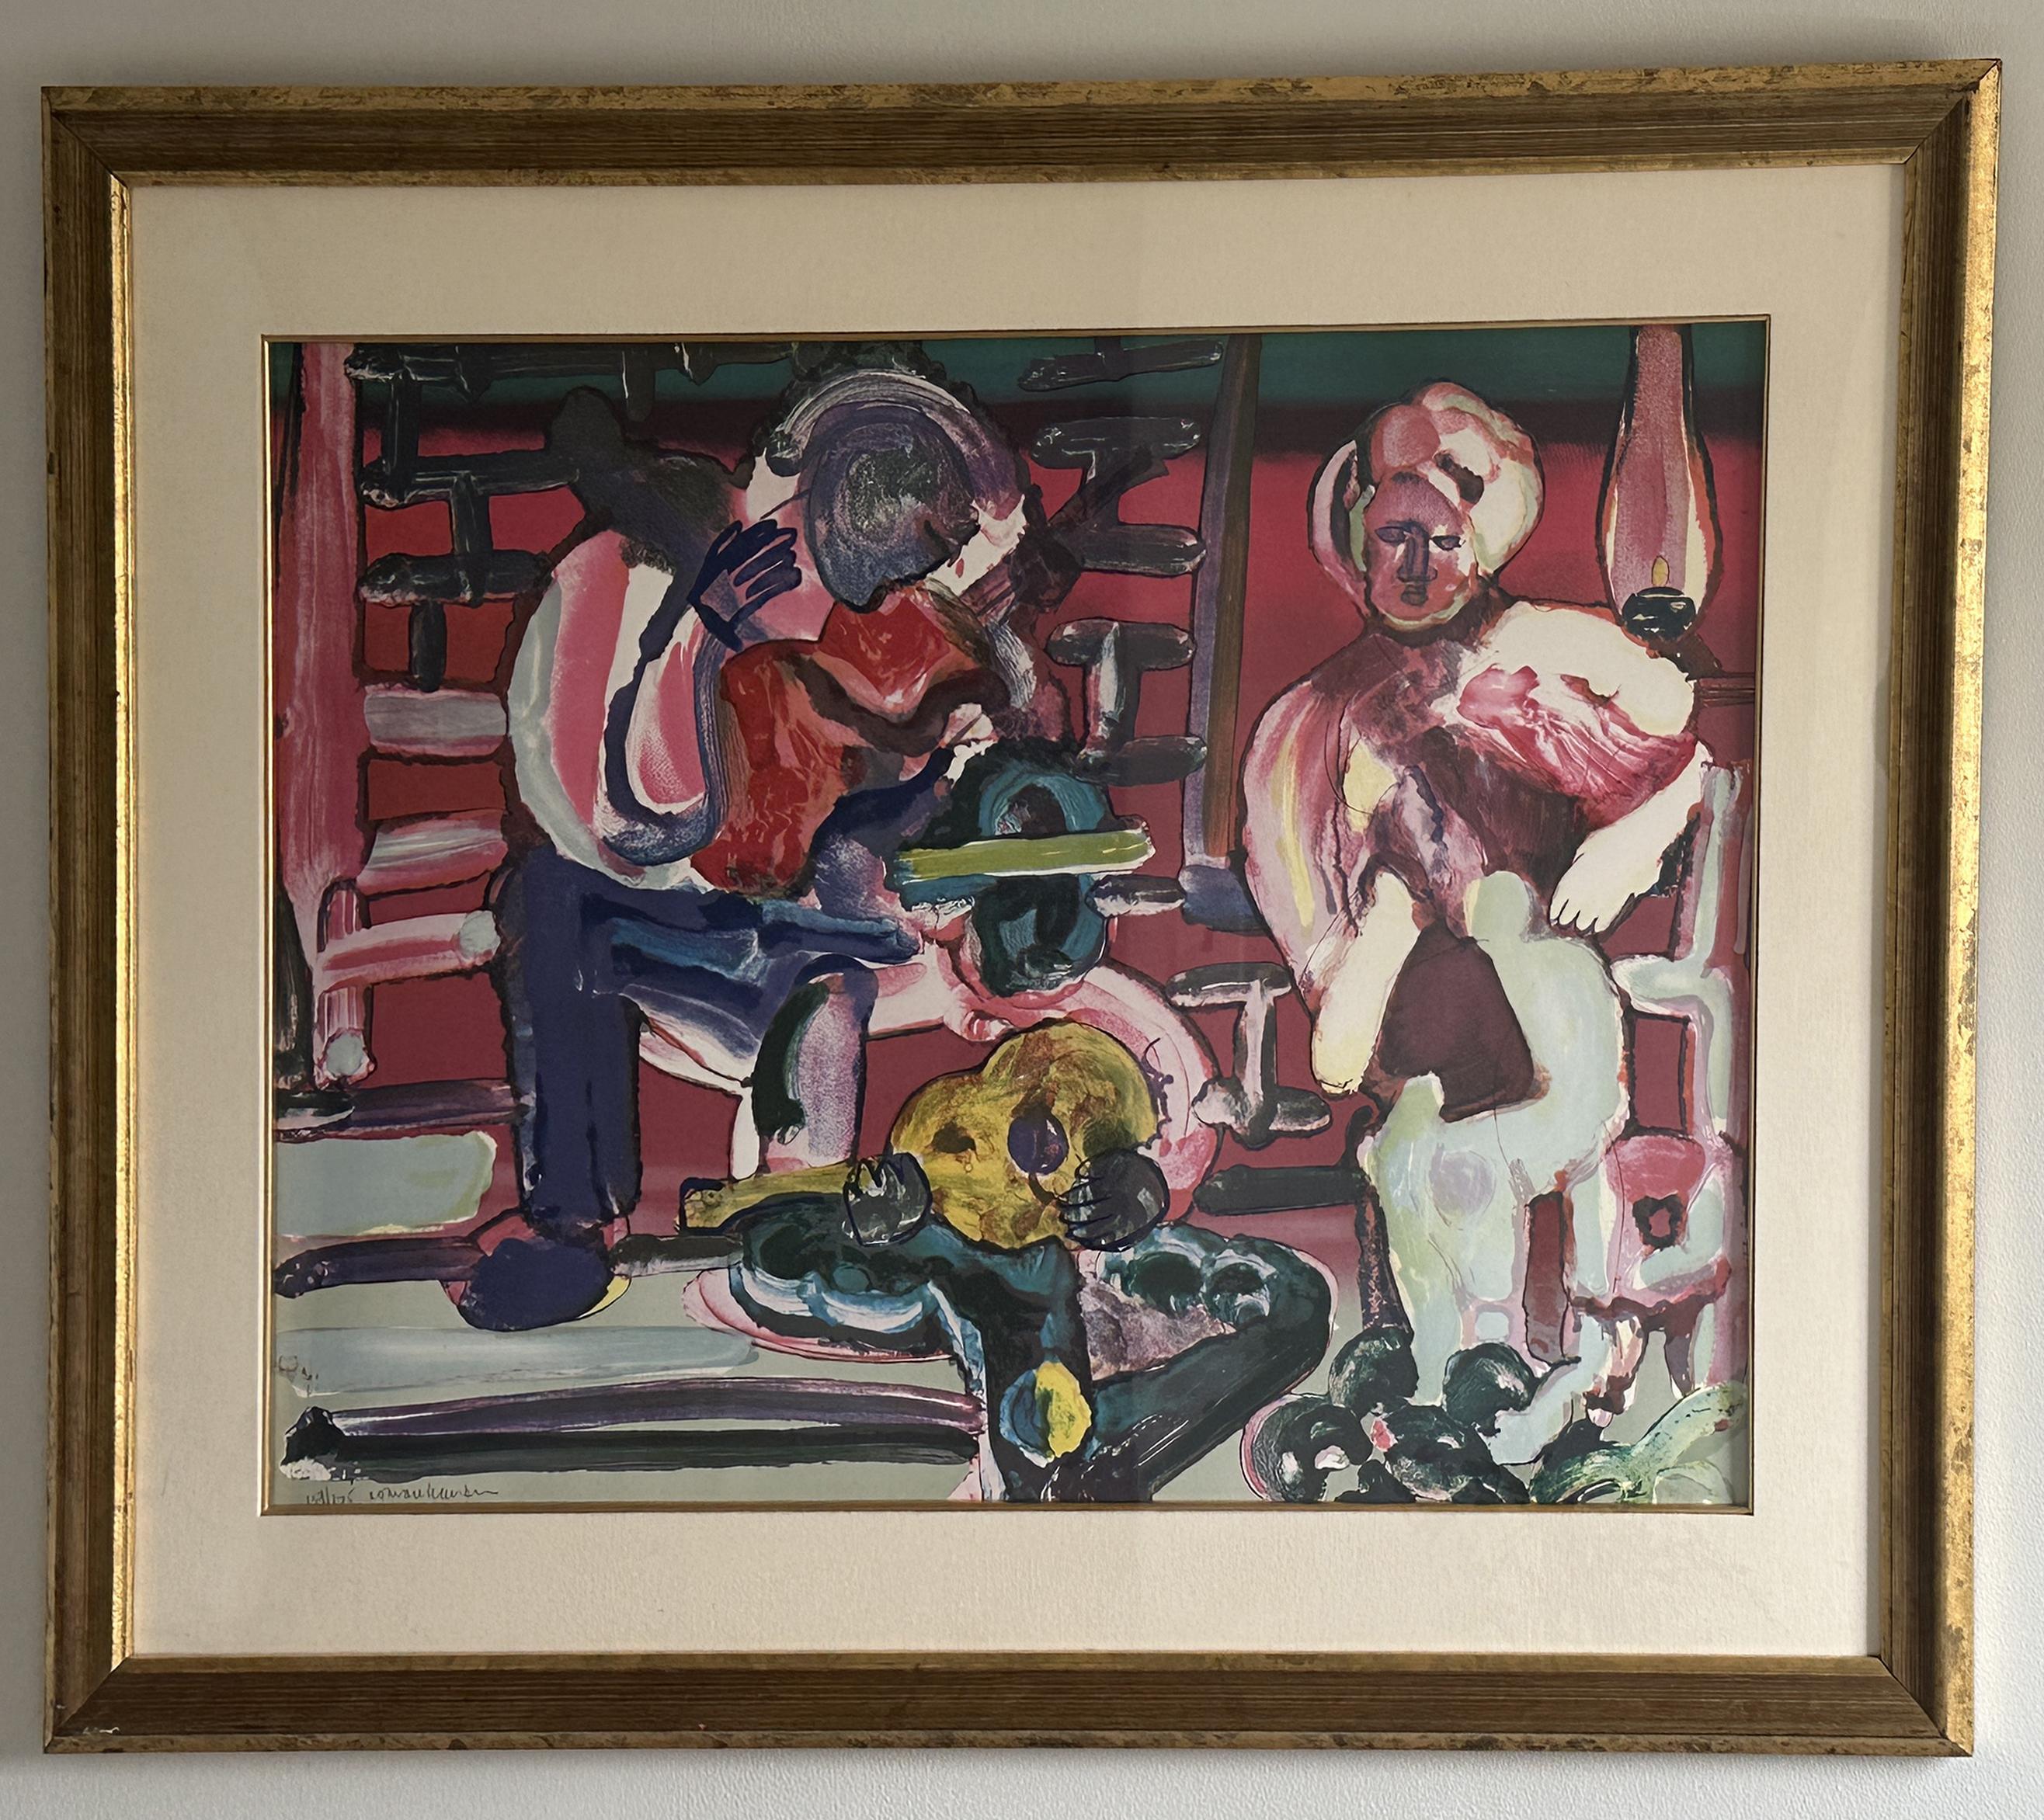 Louisiana Serenade 1979 Signed Limited Edition Lithograph - Print by Romare Bearden